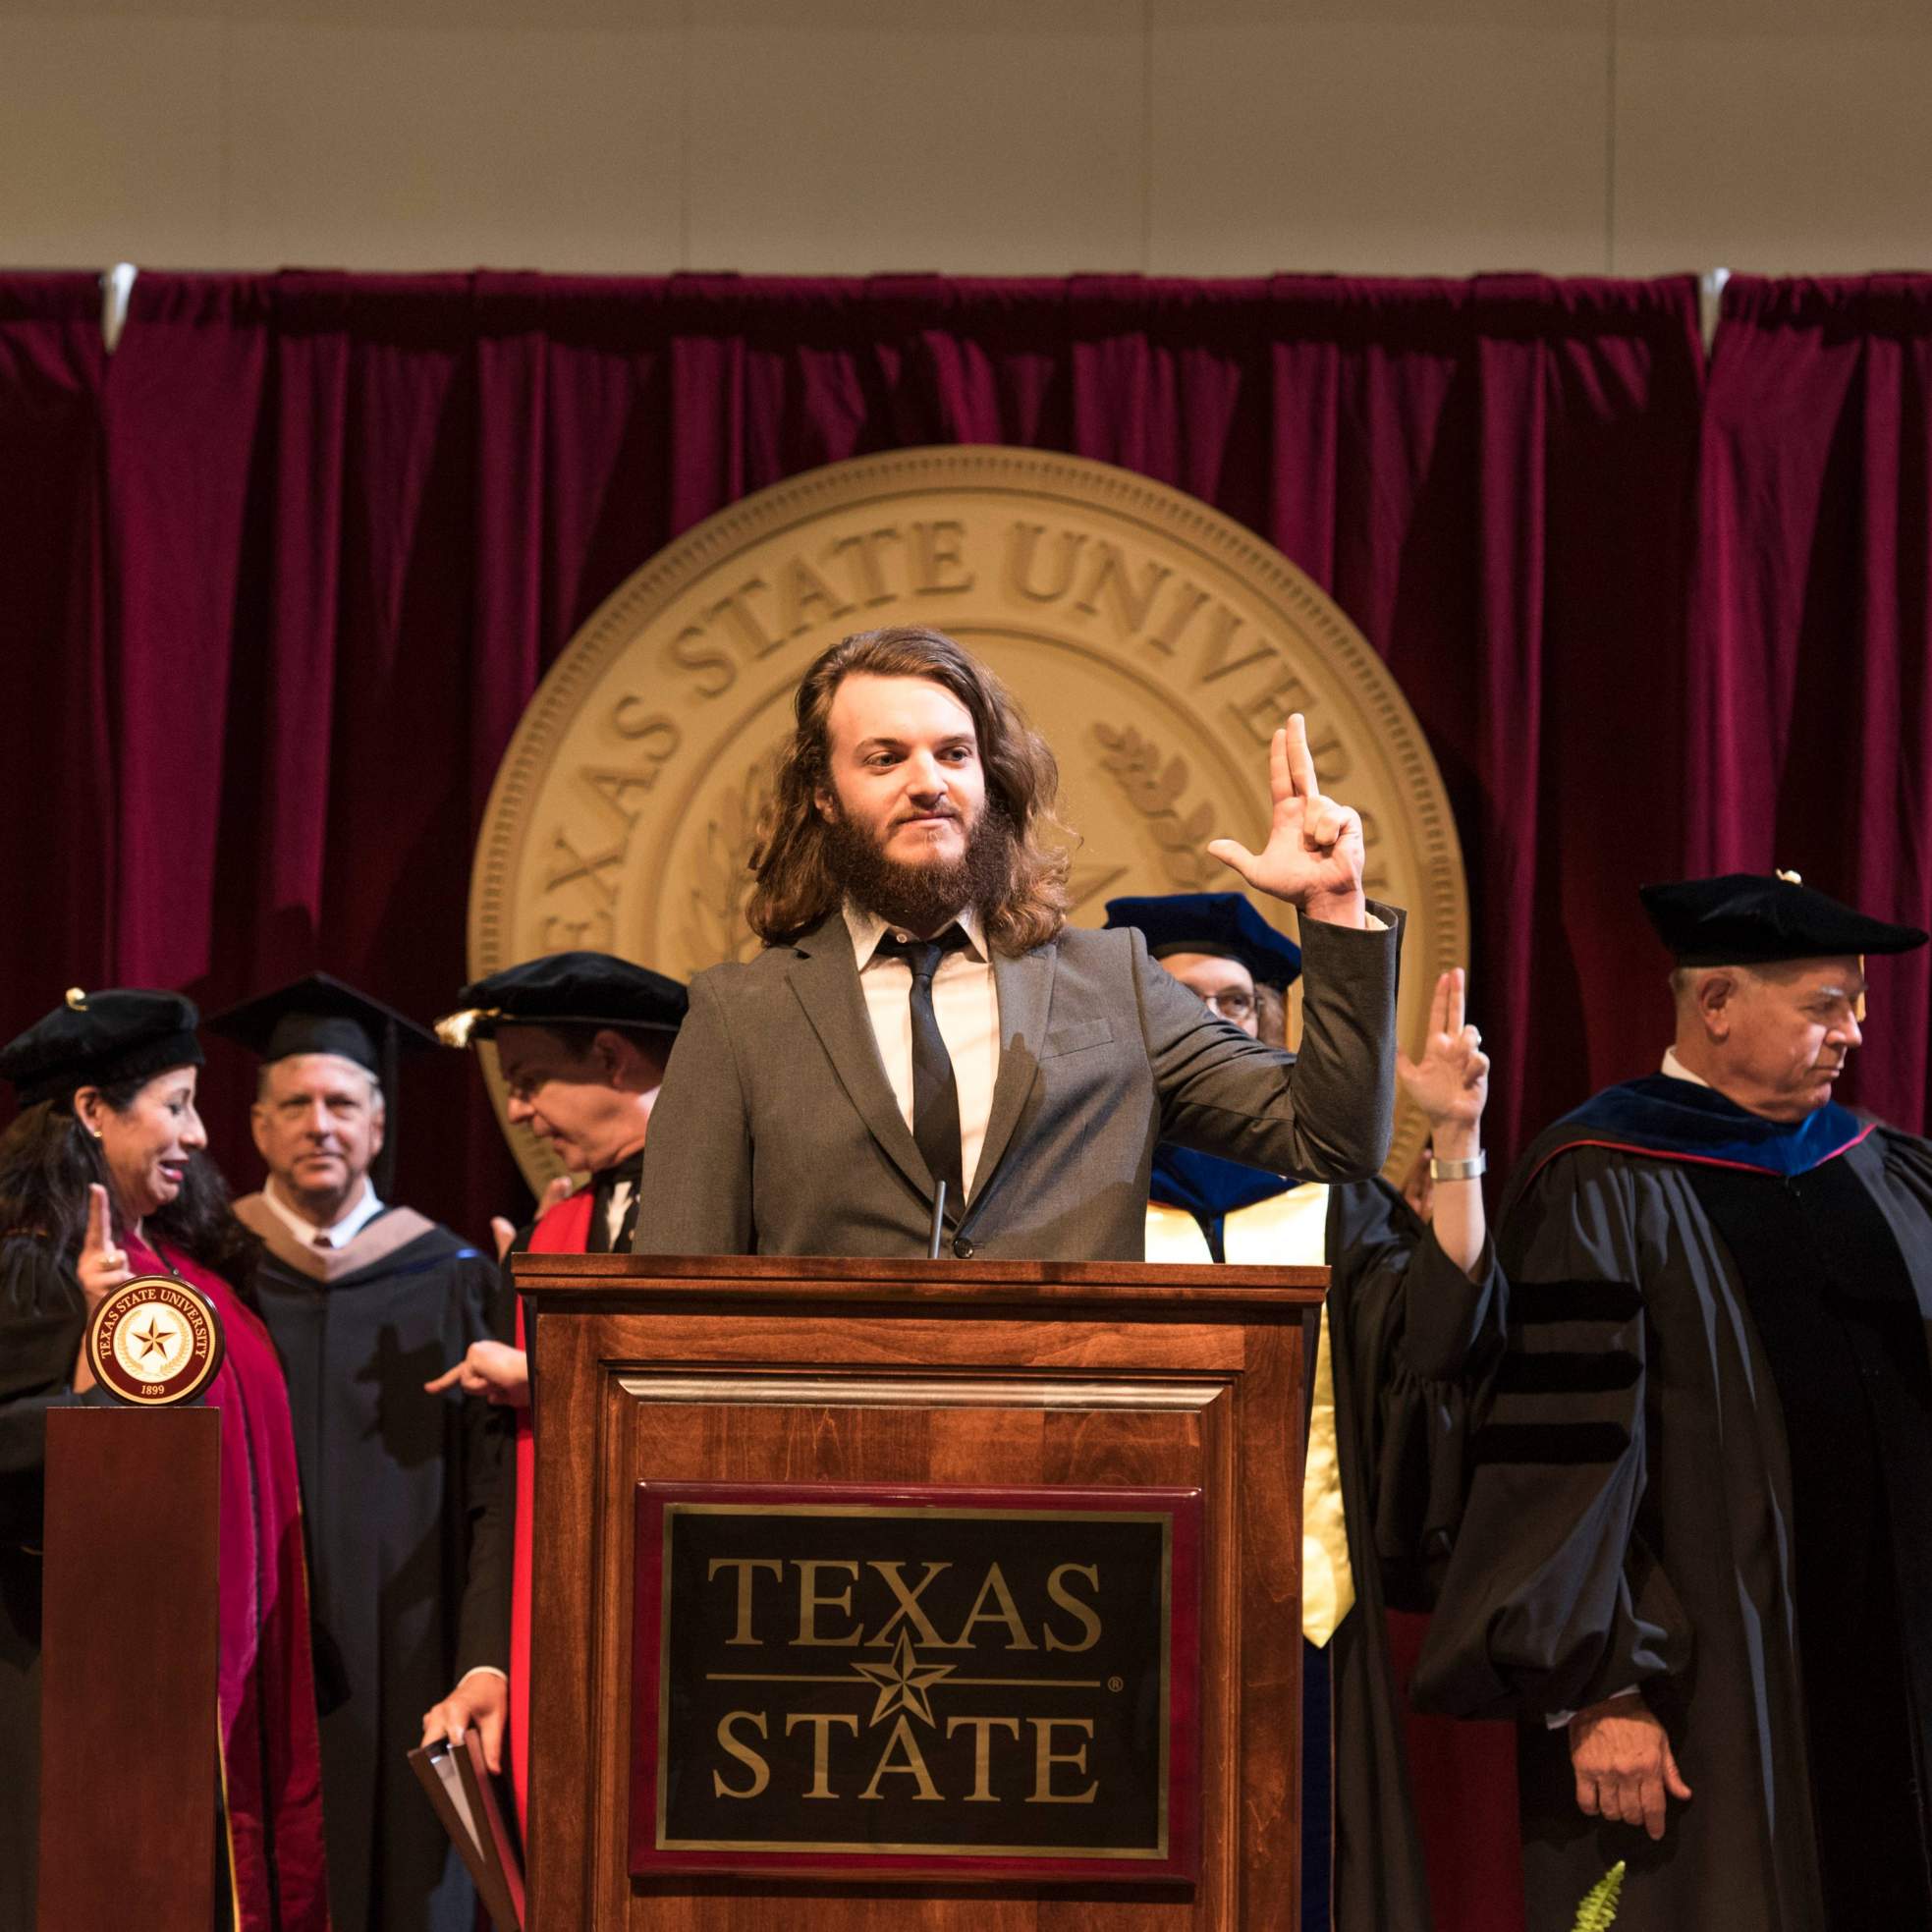 Mr. Zackerry L. Wiggs leads the singing of the Texas State Alma Mater with the state of Texas hand symbol at the closing of a Summer 2016 commencement ceremony.